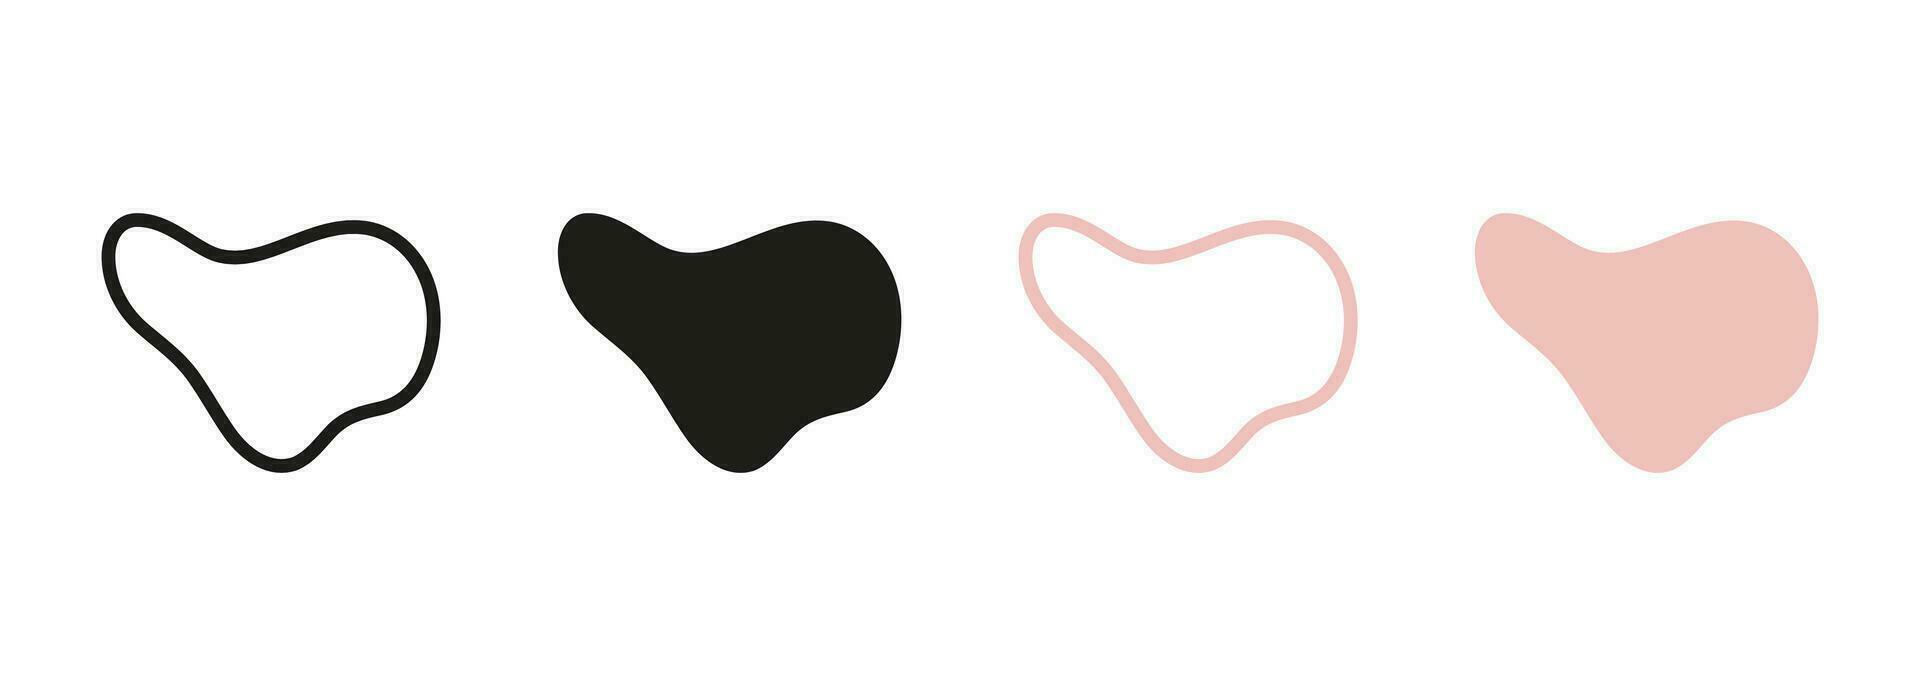 Smooth Black and Color Form. Simple Irregular Pebble, Stone, Drop Collection. Minimal Fluid. Organic Abstract Blob Shape. Random Blotch Line and Silhouette Set. Isolated Vector Illustration.